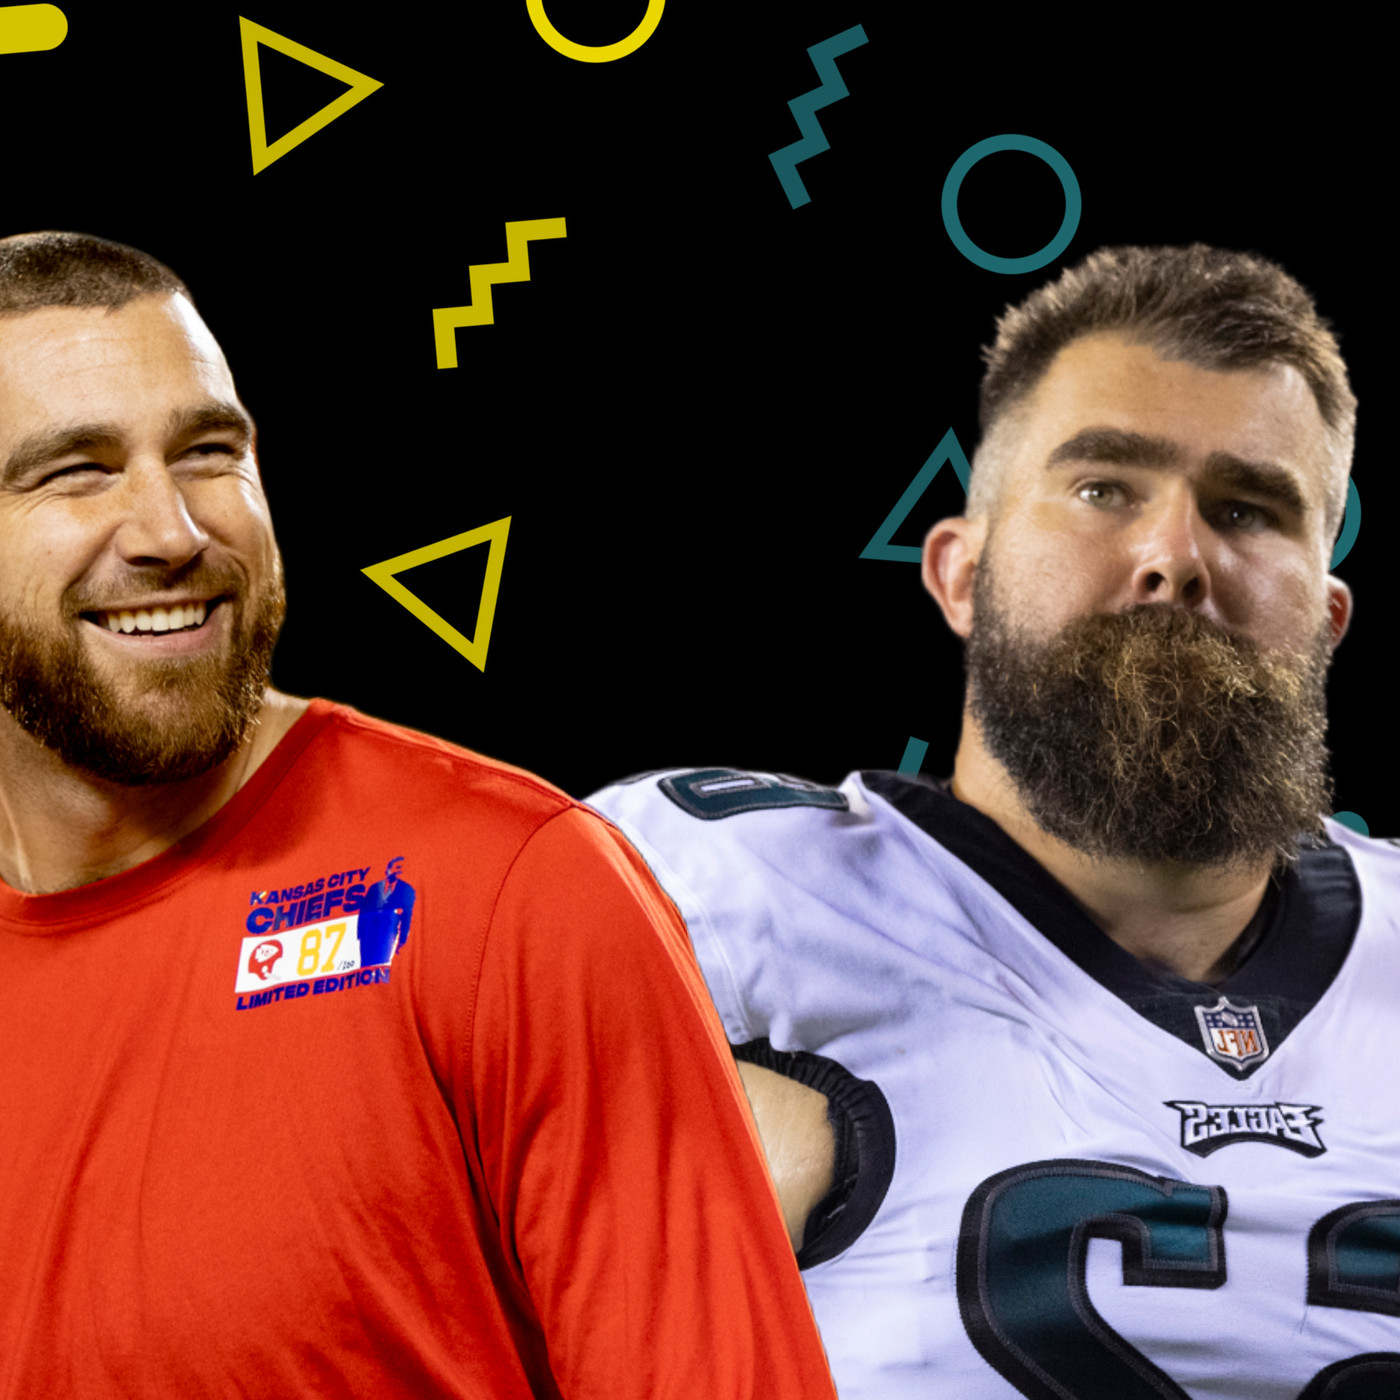 Photo: how much do the kelce brothers make off their podcast